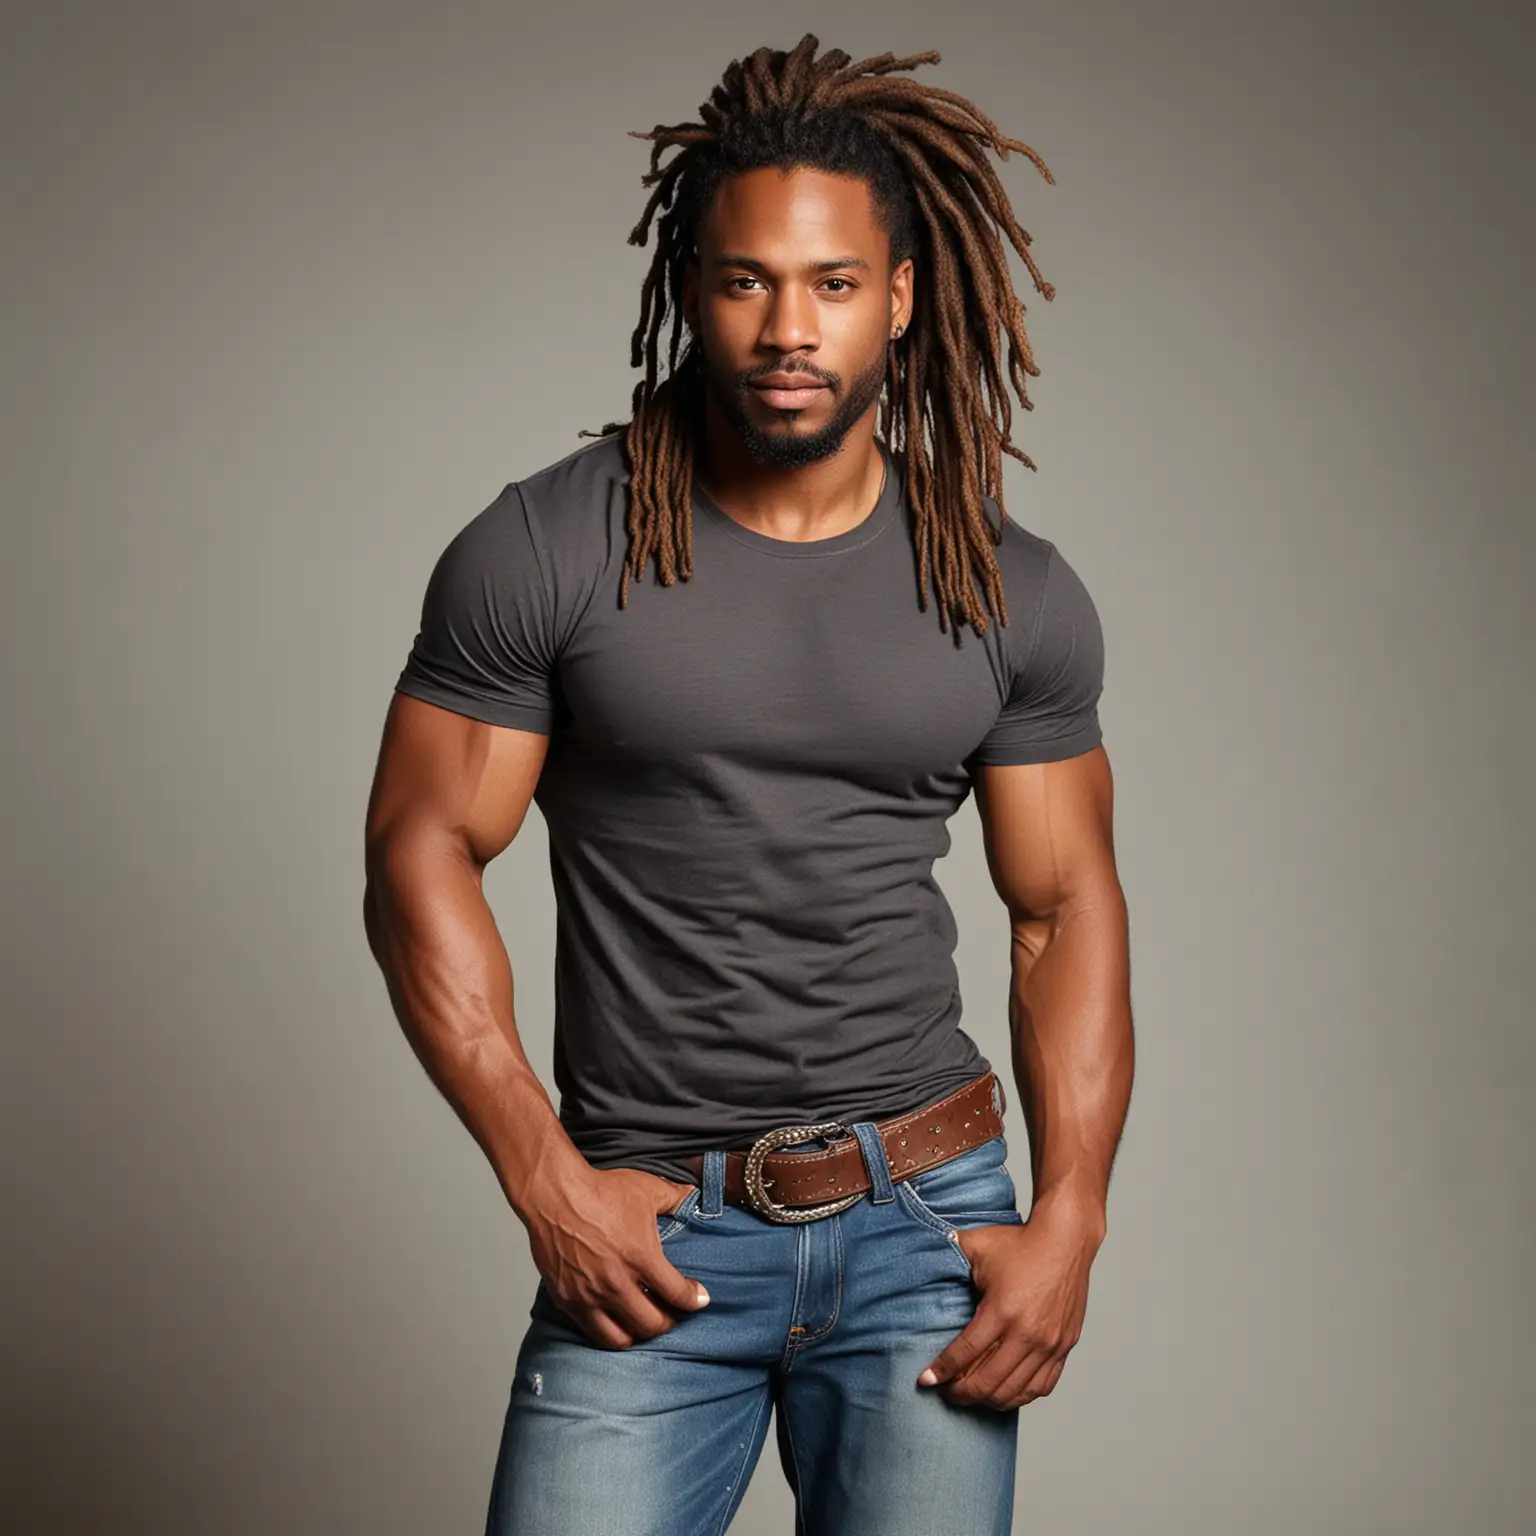 Strong African American Man with Dreadlocks and Cowboy Boots in Casual Attire